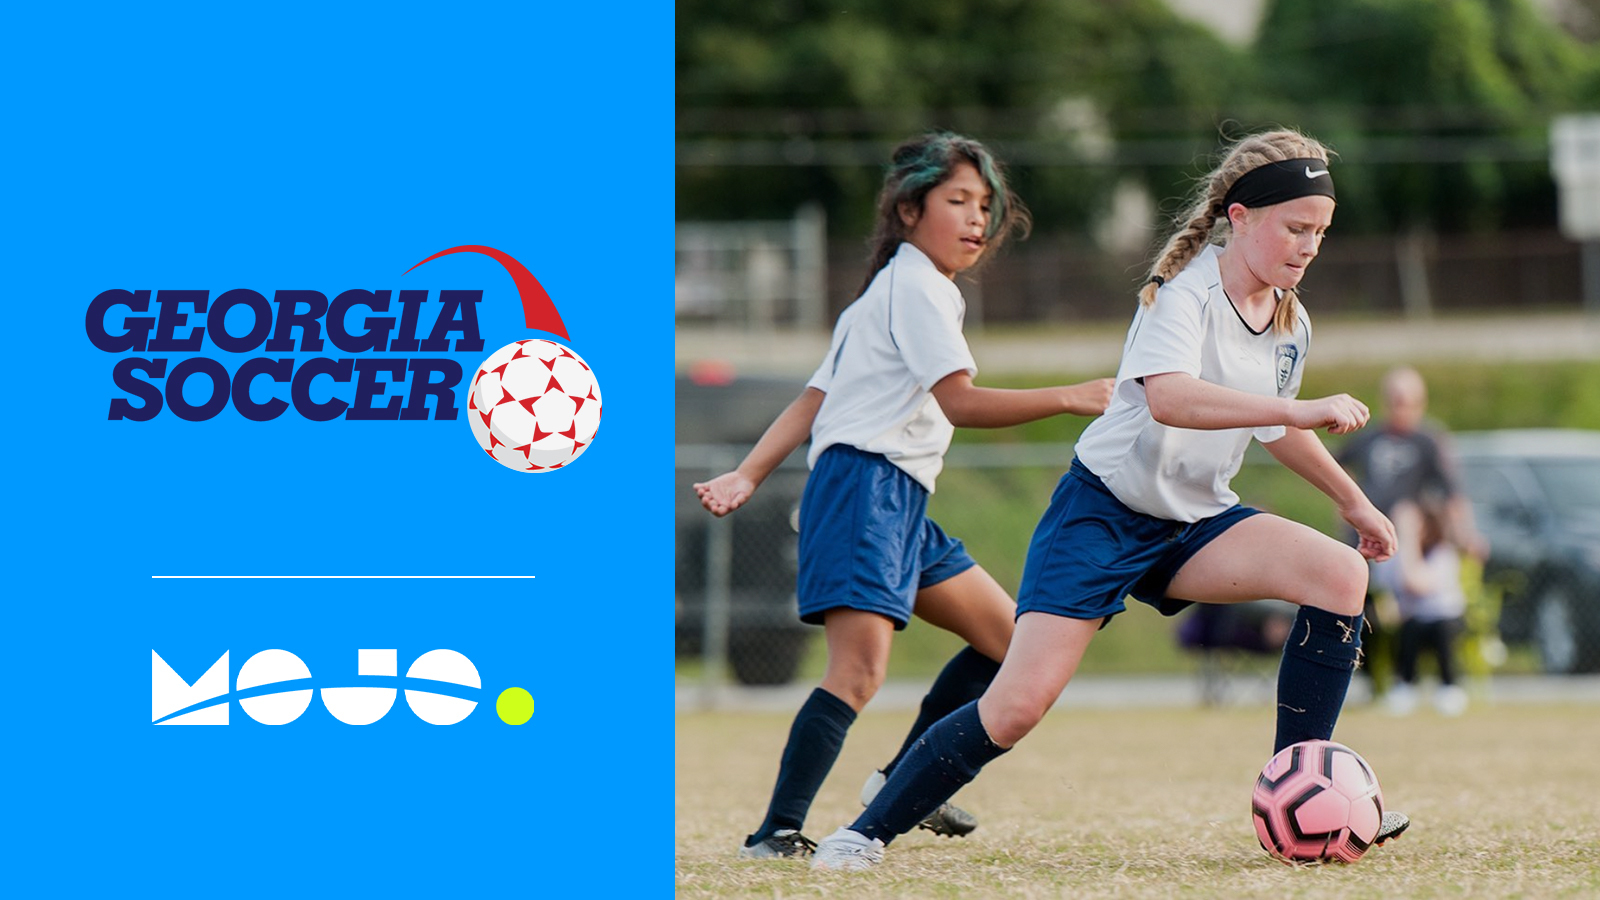 Georgia Soccer And Mojo Unite To Empower Youth Coaches And Bring More Family Fun To The Peach State Mojo Sports